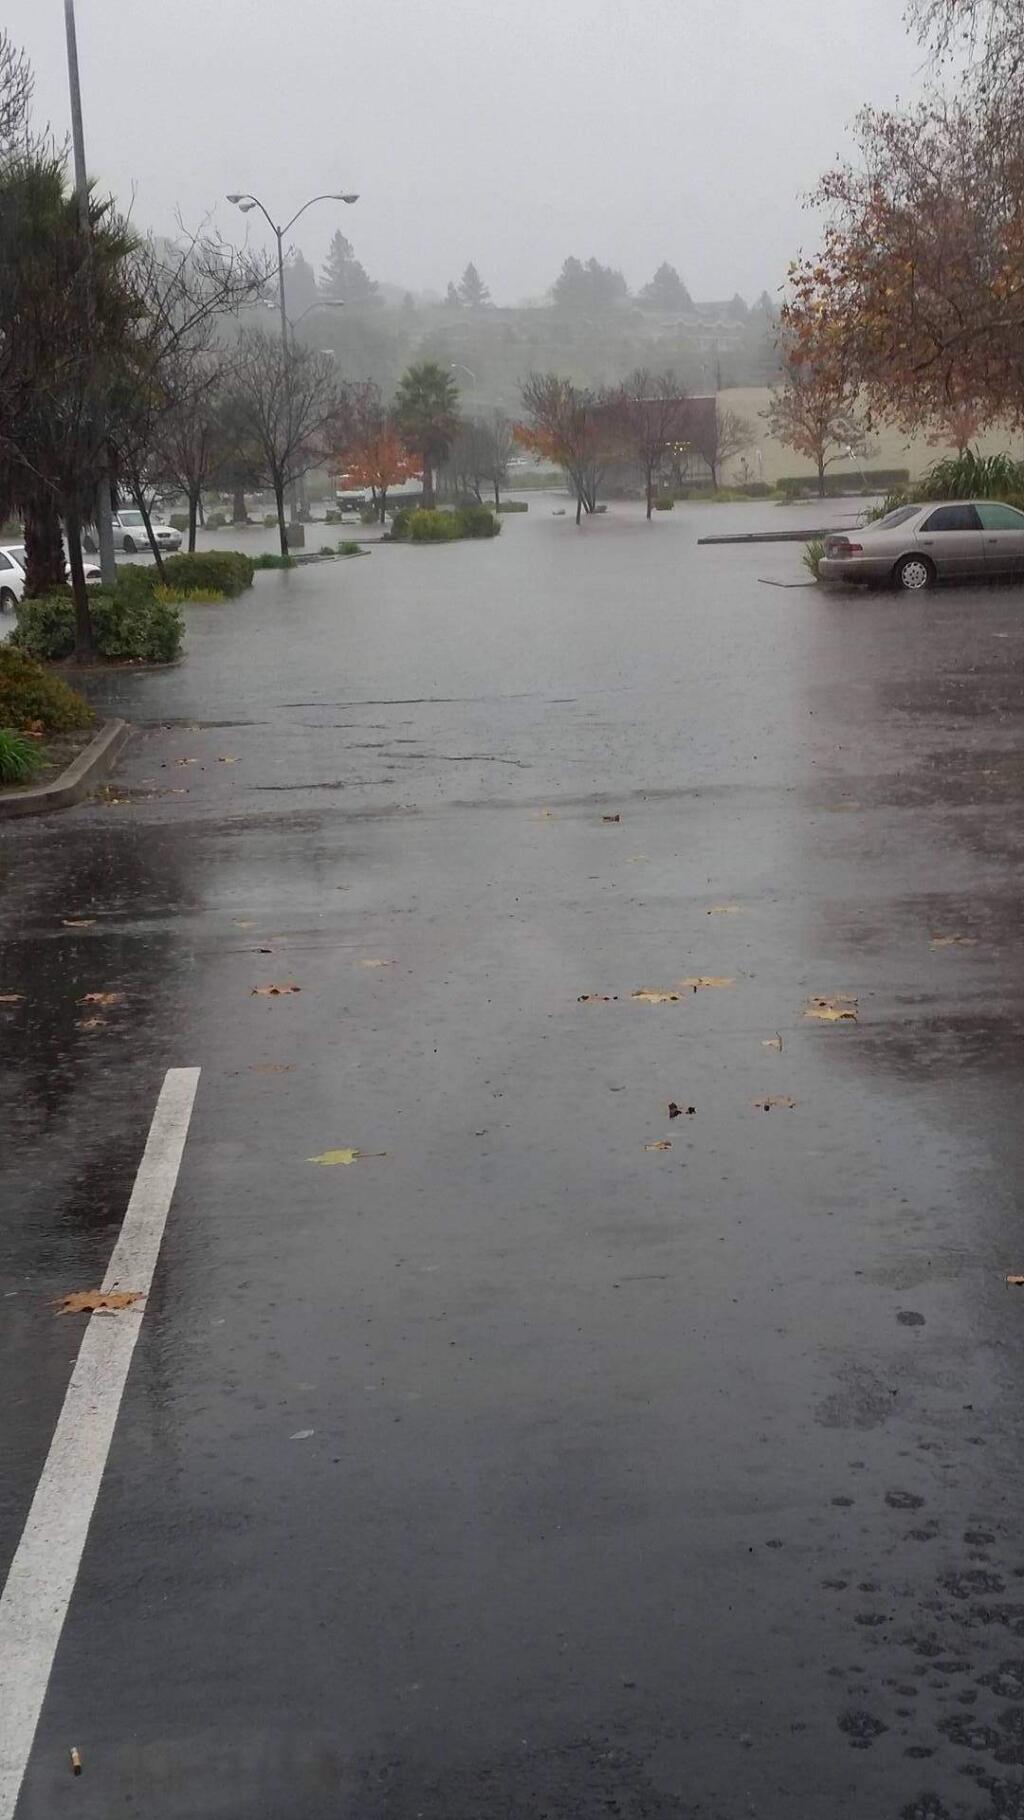 The Kmart parking lot on Industrial Drive in Santa Rosa flooded on Thursday, Dec. 15, 2016. (SUBMITTED BY LUCIANNA DAVIS)